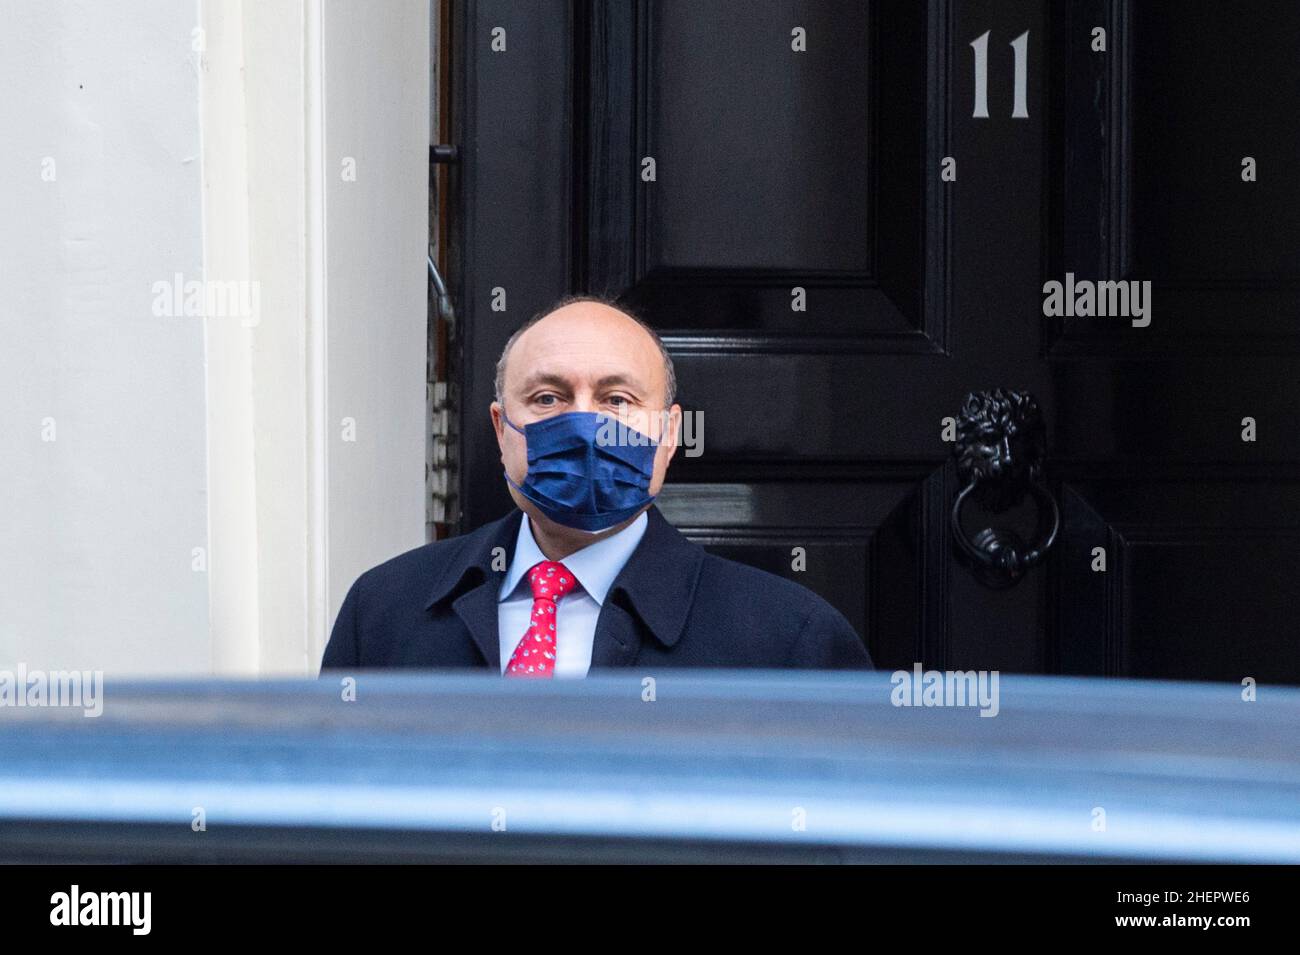 London, UK.  12 January 2022.  Andrew Griffith MP, Chief Business Adviser to the Prime Minister, at the door of Number 11 Downing Street ahead of Boris Johnson, Prime Minister departing for Prime Minister’s Questions (PMQs) at the House of Commons.  The Prime Minister is under pressure from MPs to respond to questions relating to a party on 20 May 2020 in the gardens of 10 Downing Street, at a time when UK lockdown restrictions banned social gatherings.    Credit: Stephen Chung / Alamy Live News Stock Photo